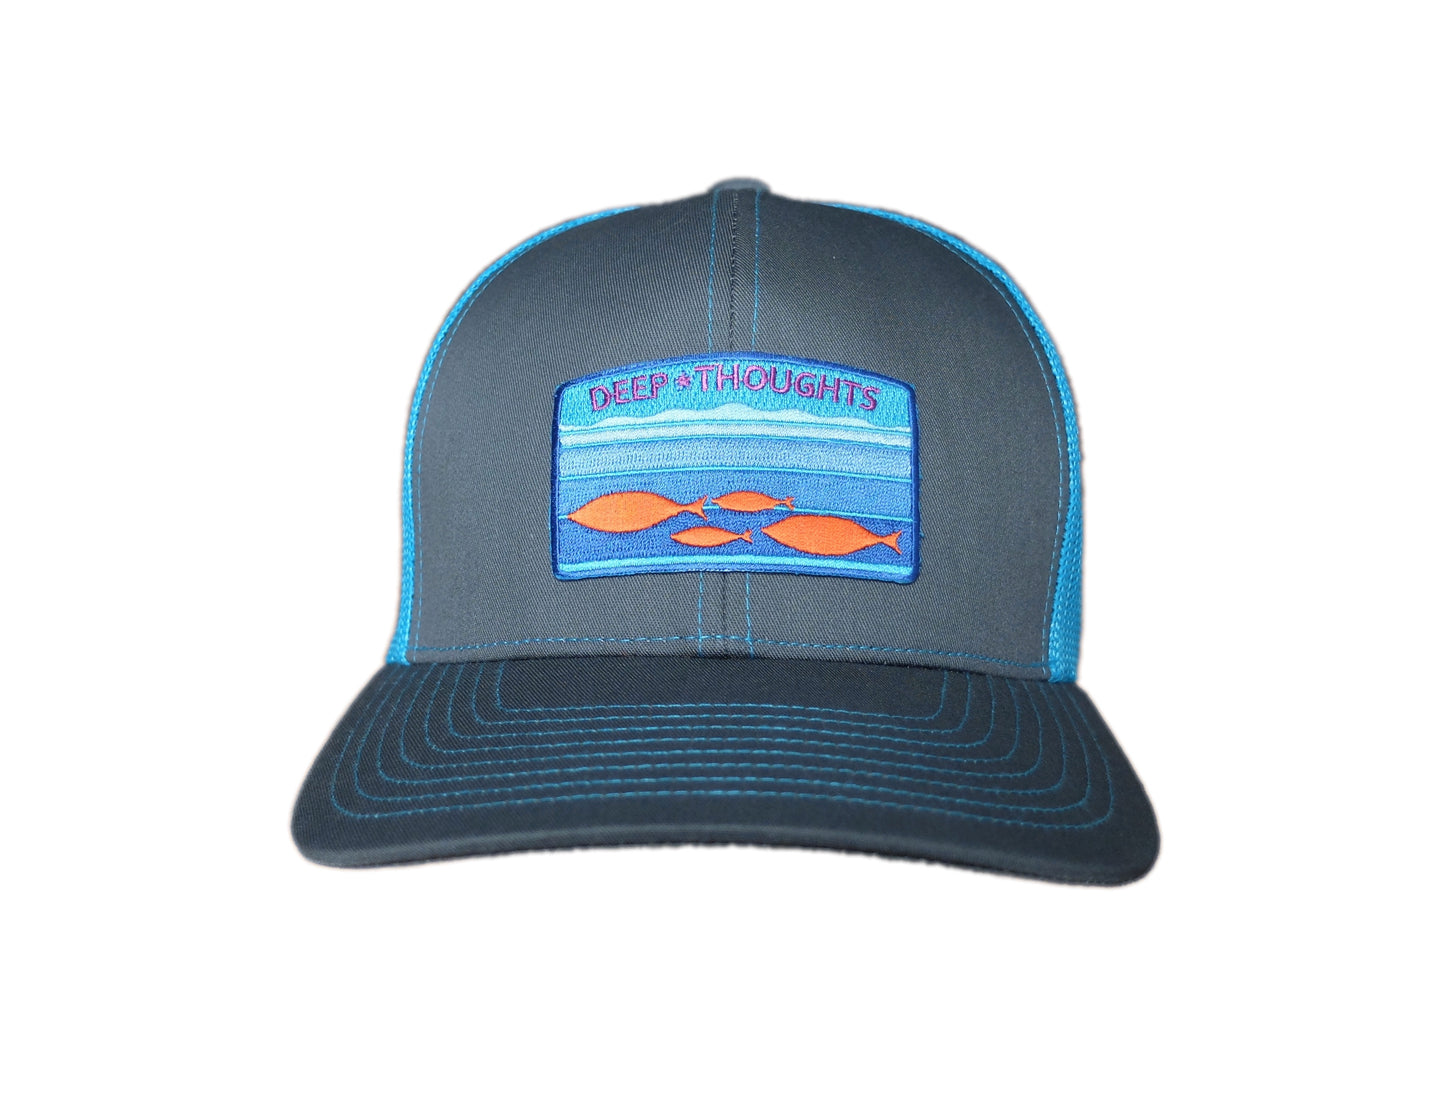 front view of graphite grey and neon blue trucker cap with aqua blue embroidered patch showing fish beneath ocean currents